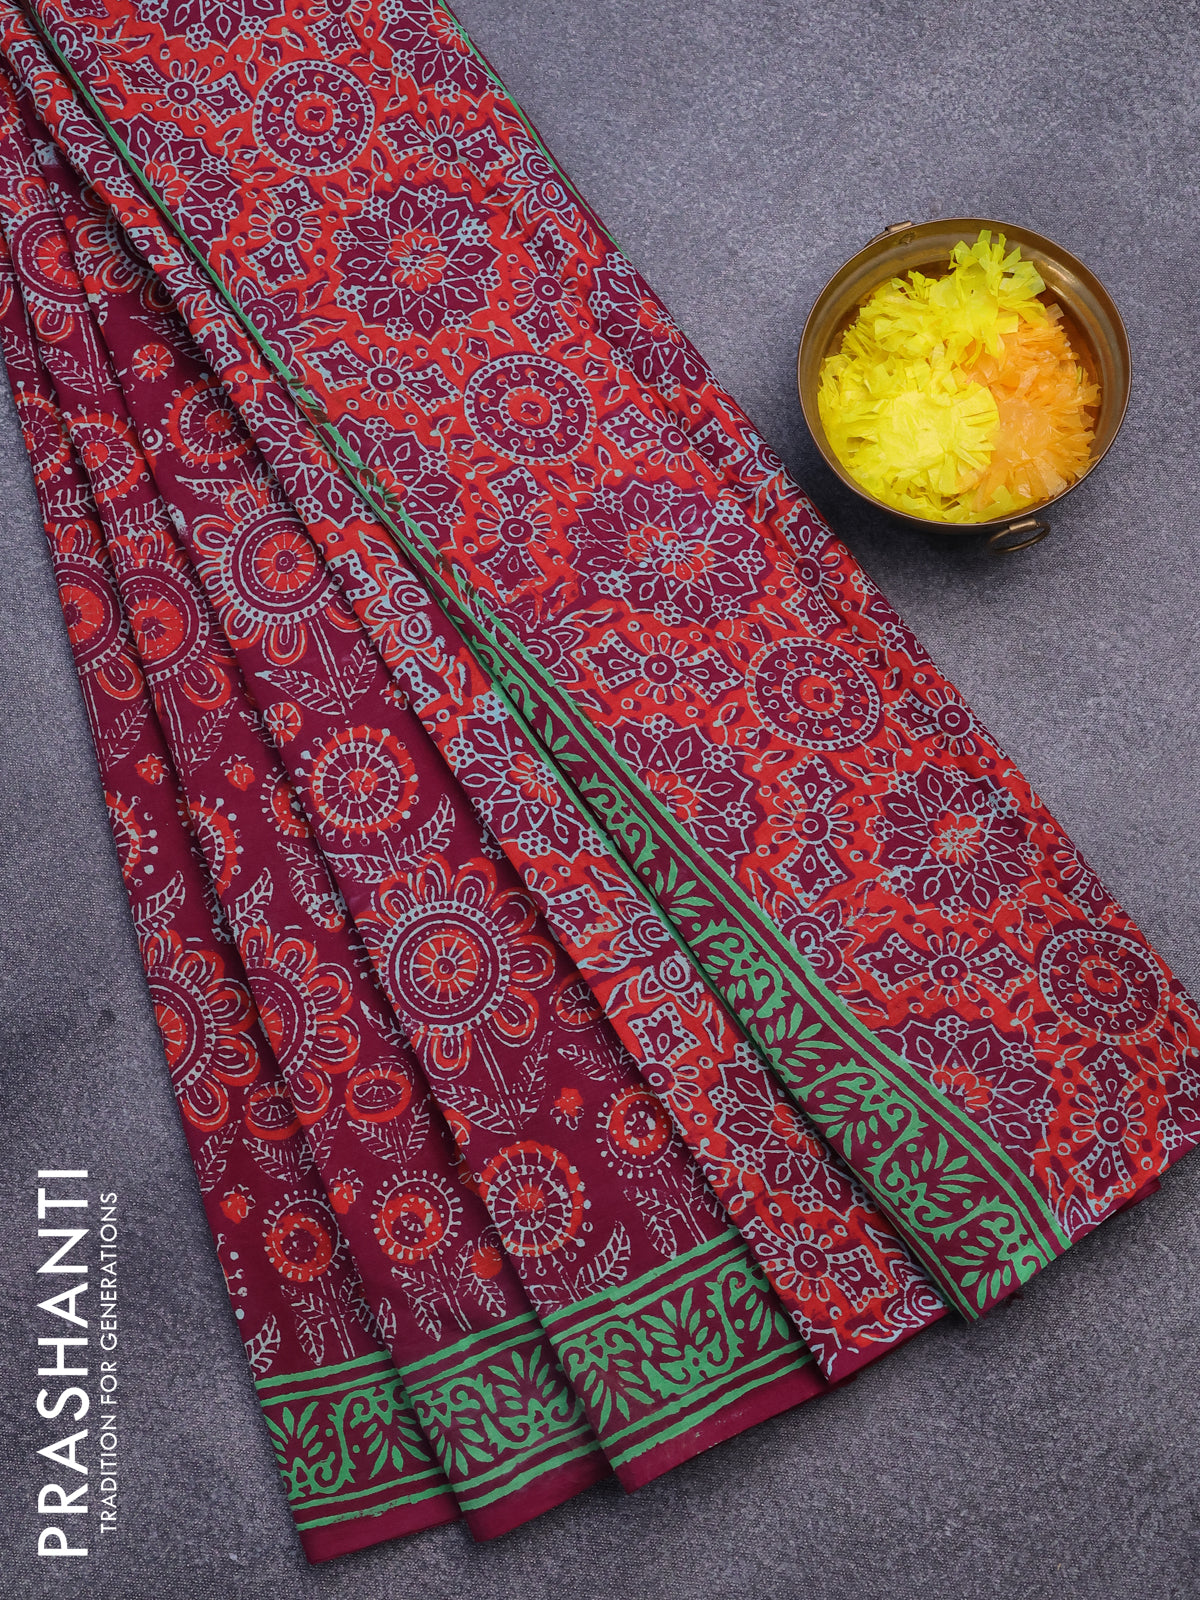 Jaipur cotton saree dark magenta pink and green with allover prints an ...